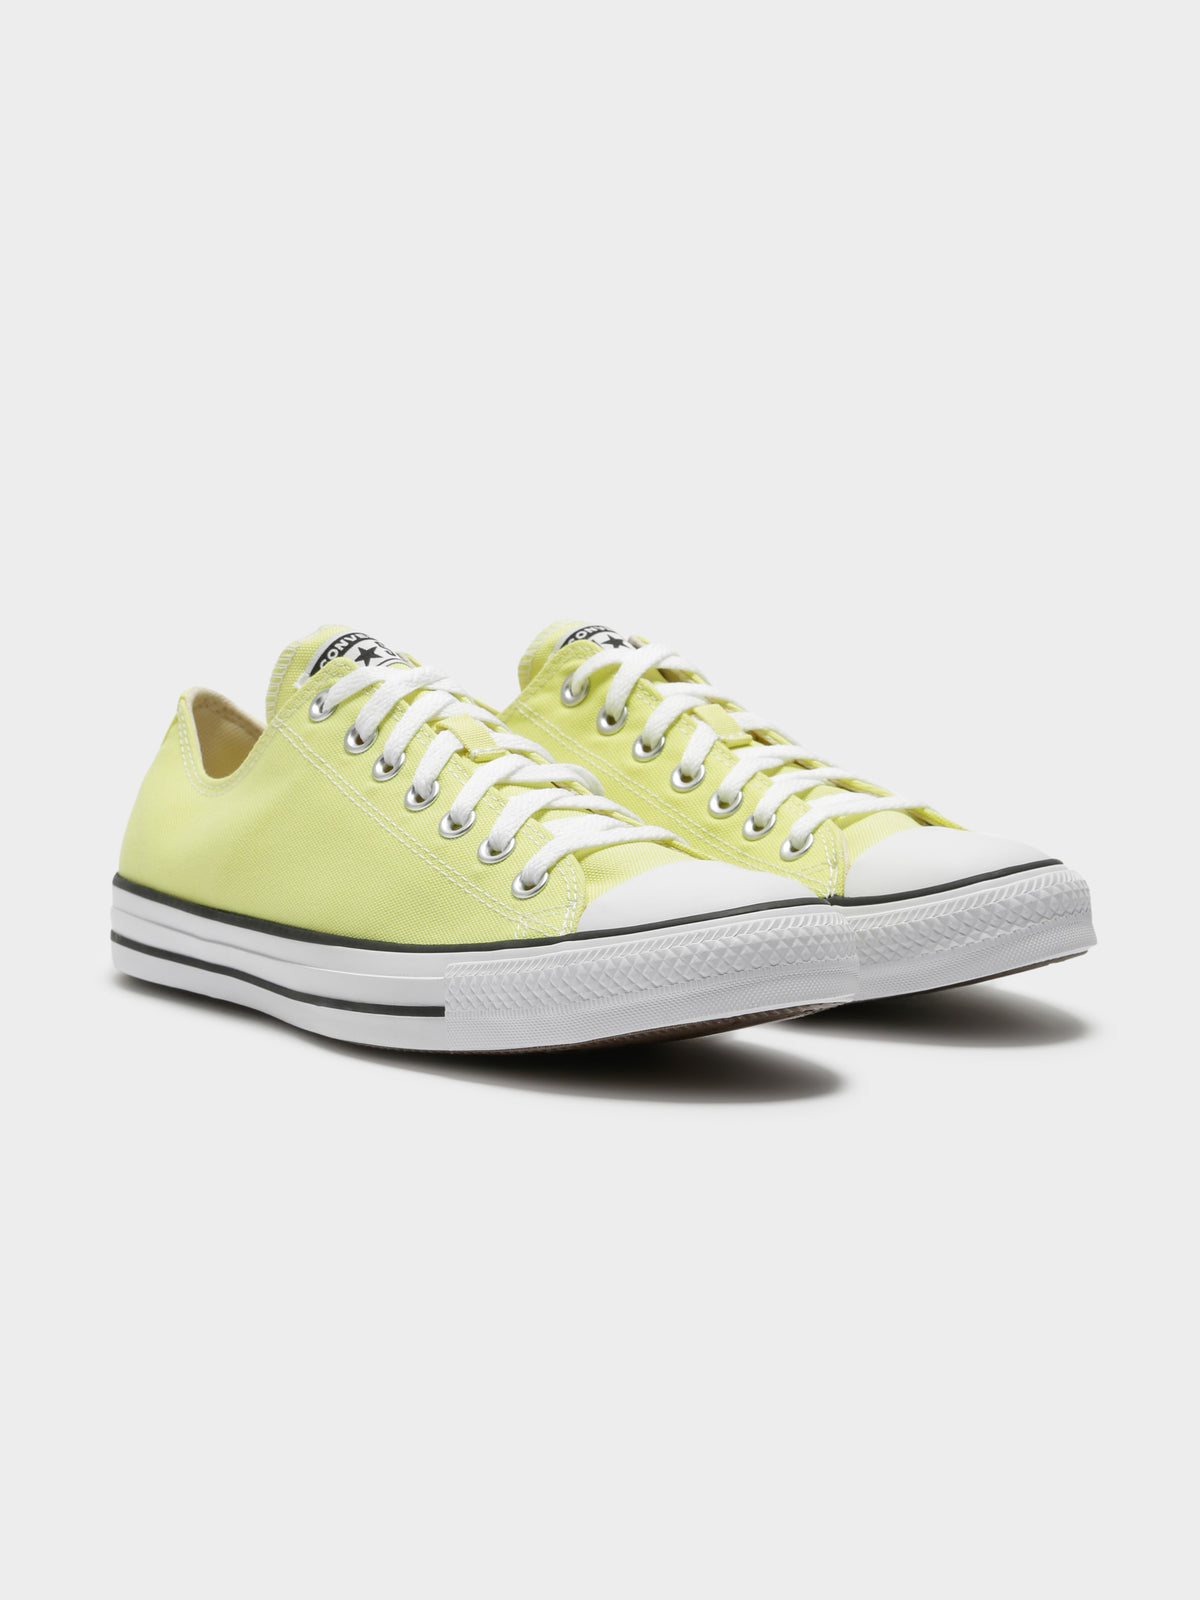 Unisex Chuck Taylor All Star Ox Low Top Sneakers in Light Zitron